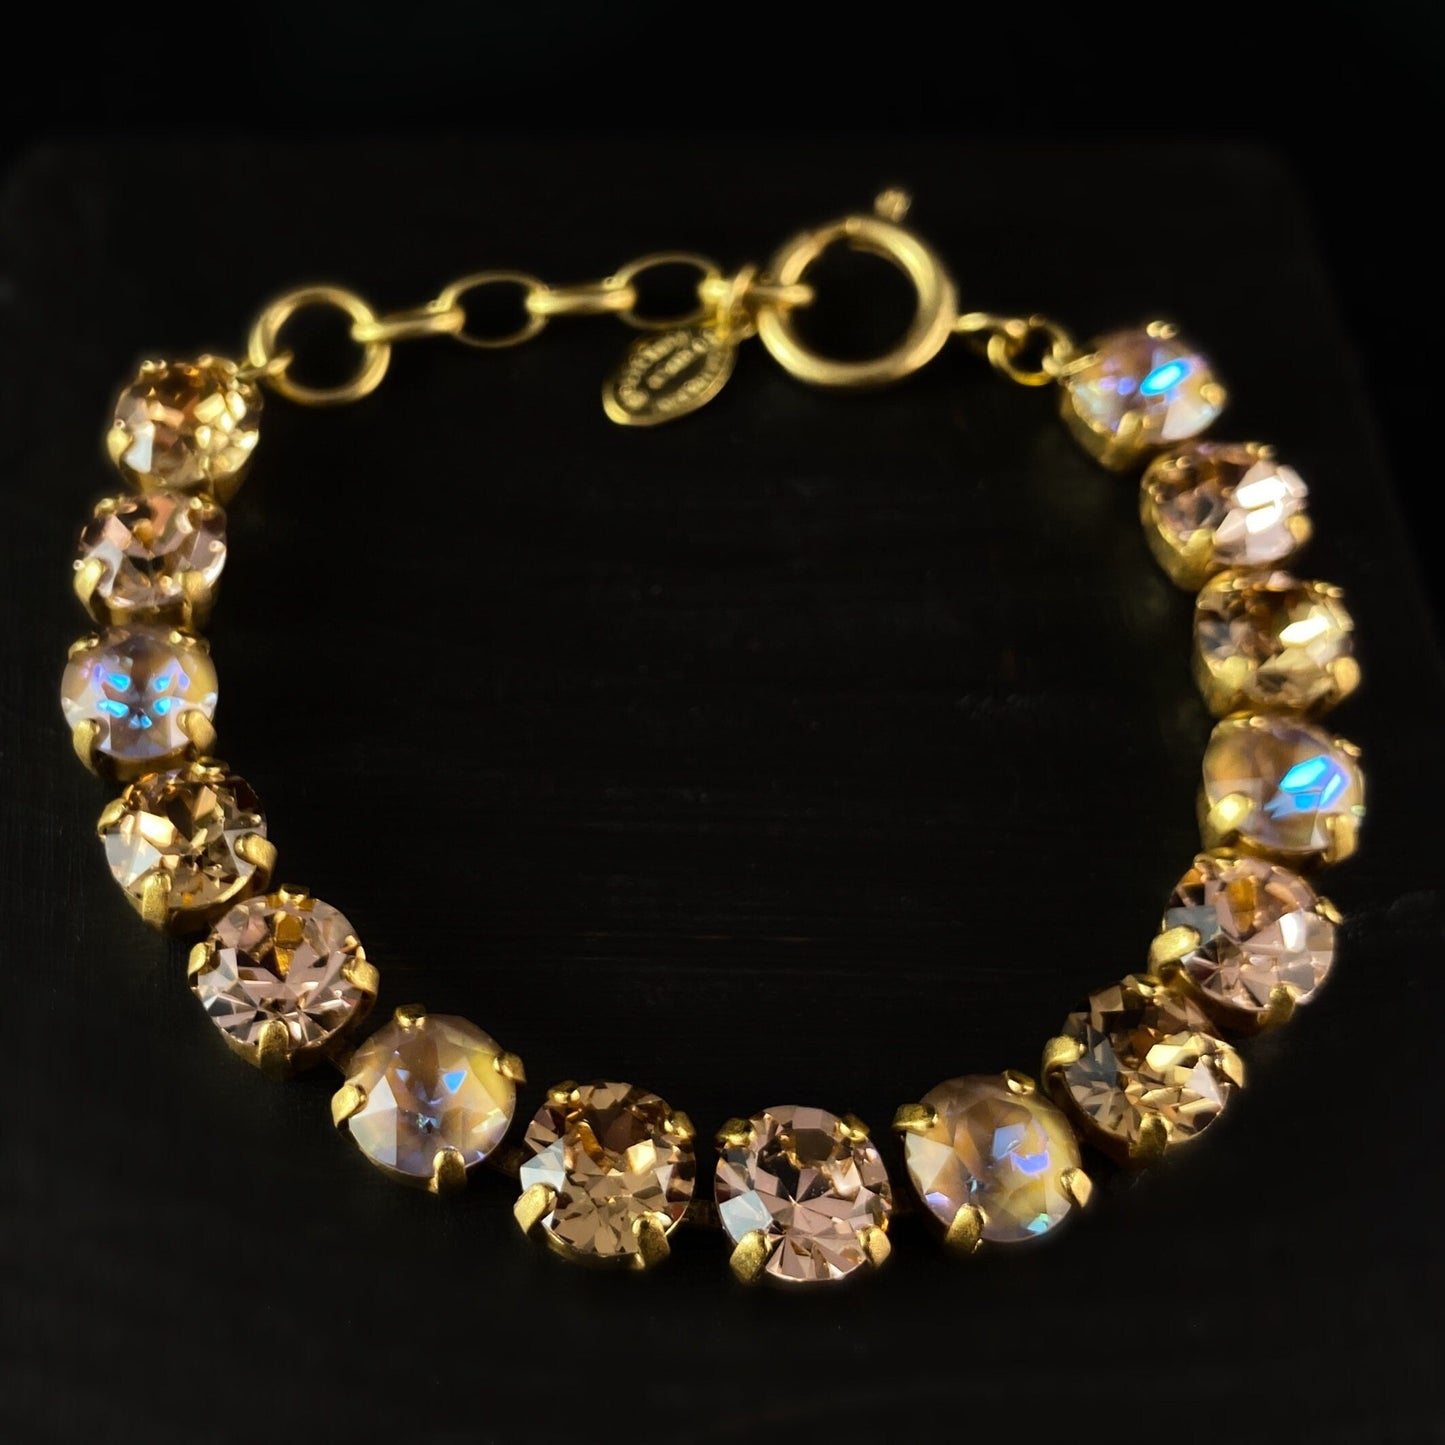 Multicolor Swarovski Crystal Bracelet with Pink, Champagne, and Milky Crystals - La Vie Parisienne by Catherine Popesco